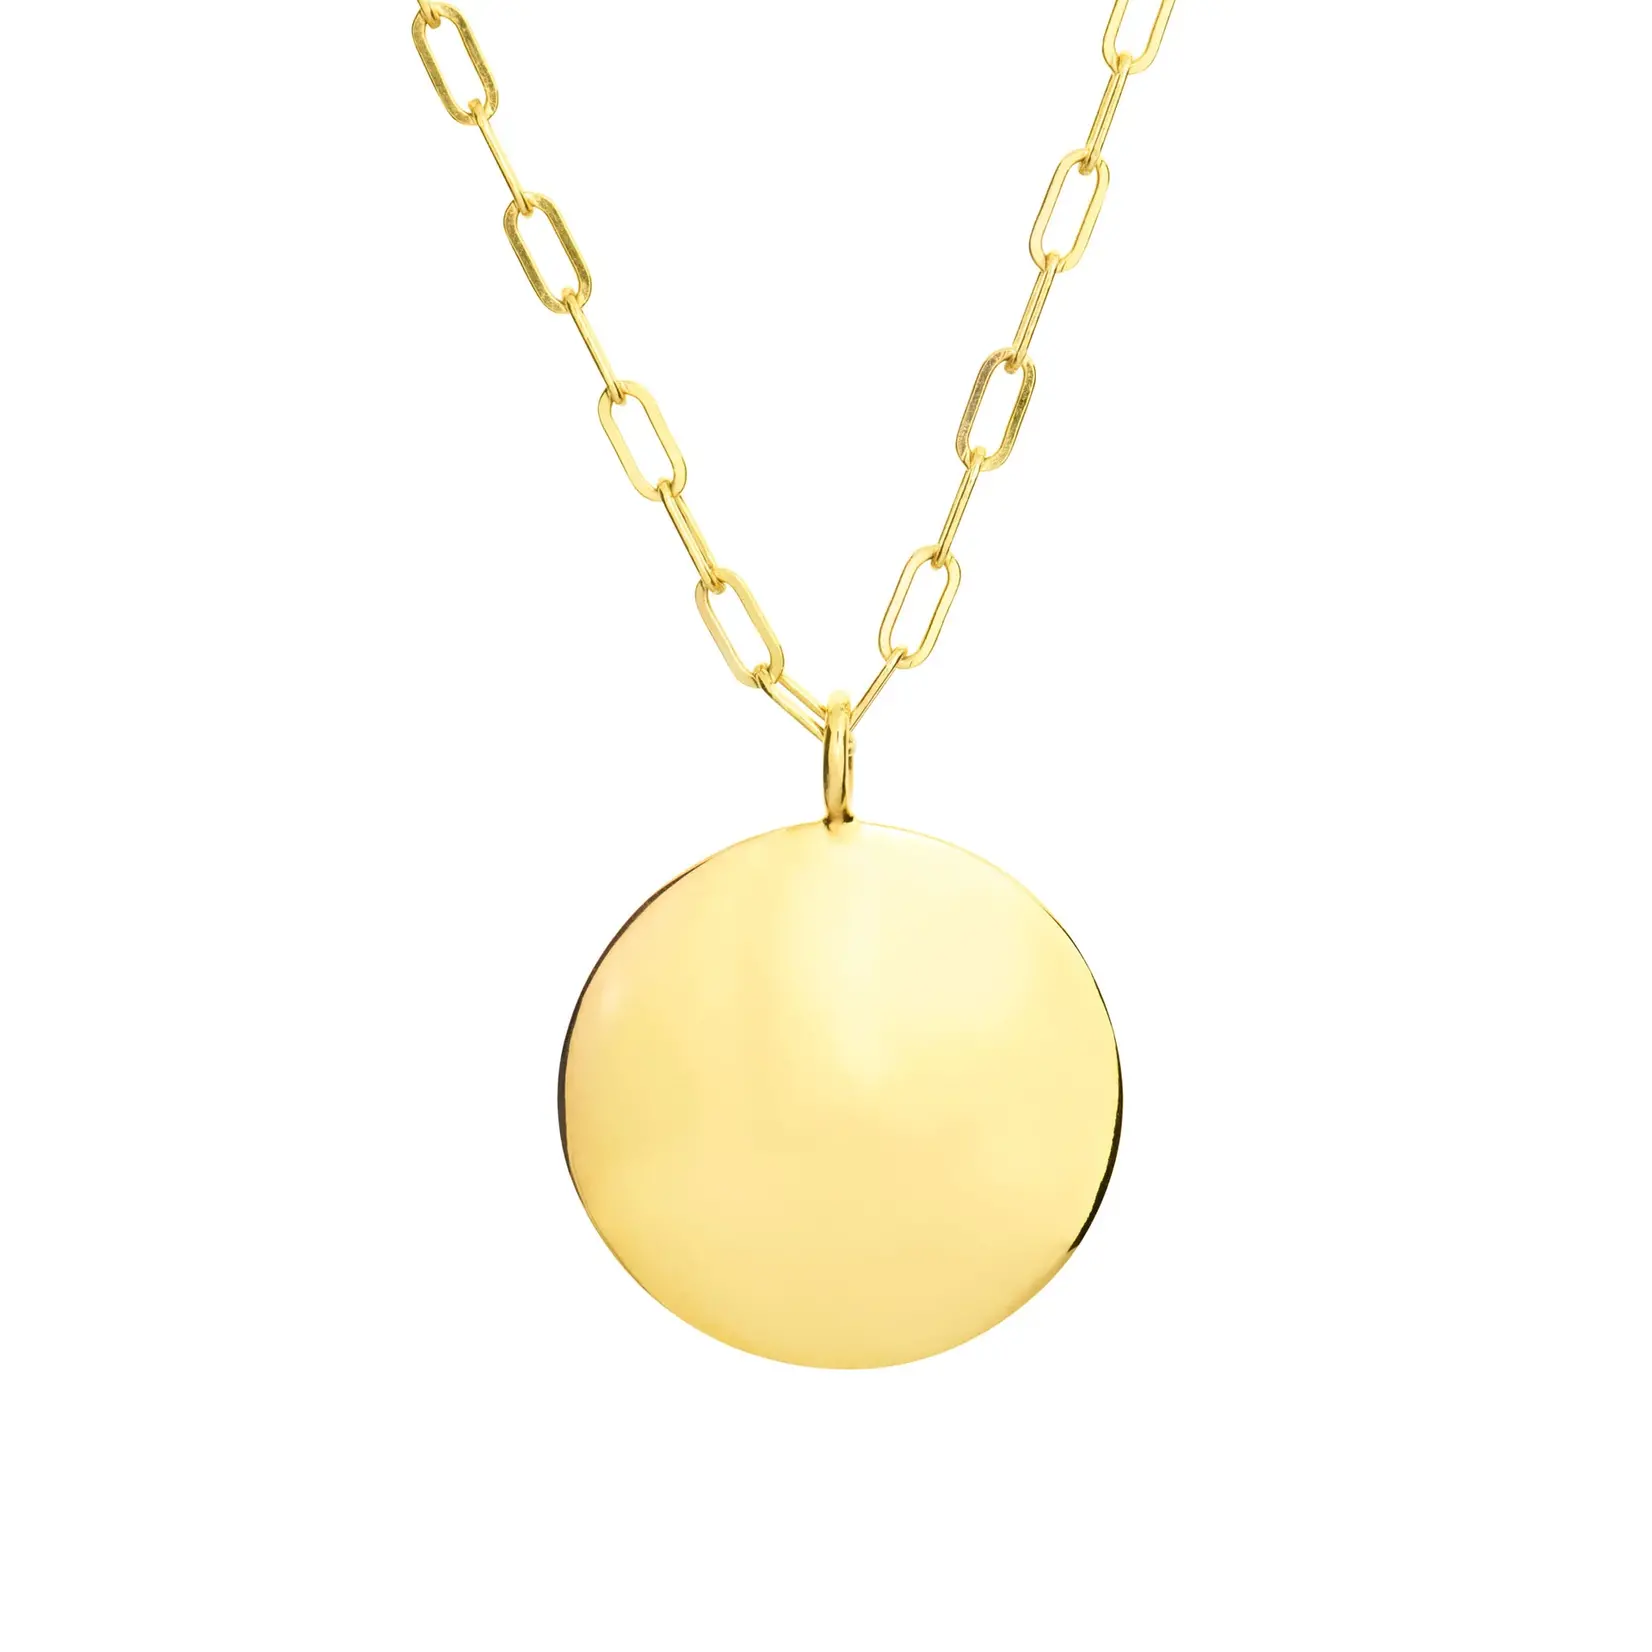 Lolo Jewellery Chloe Gold Disc Necklace - 18"